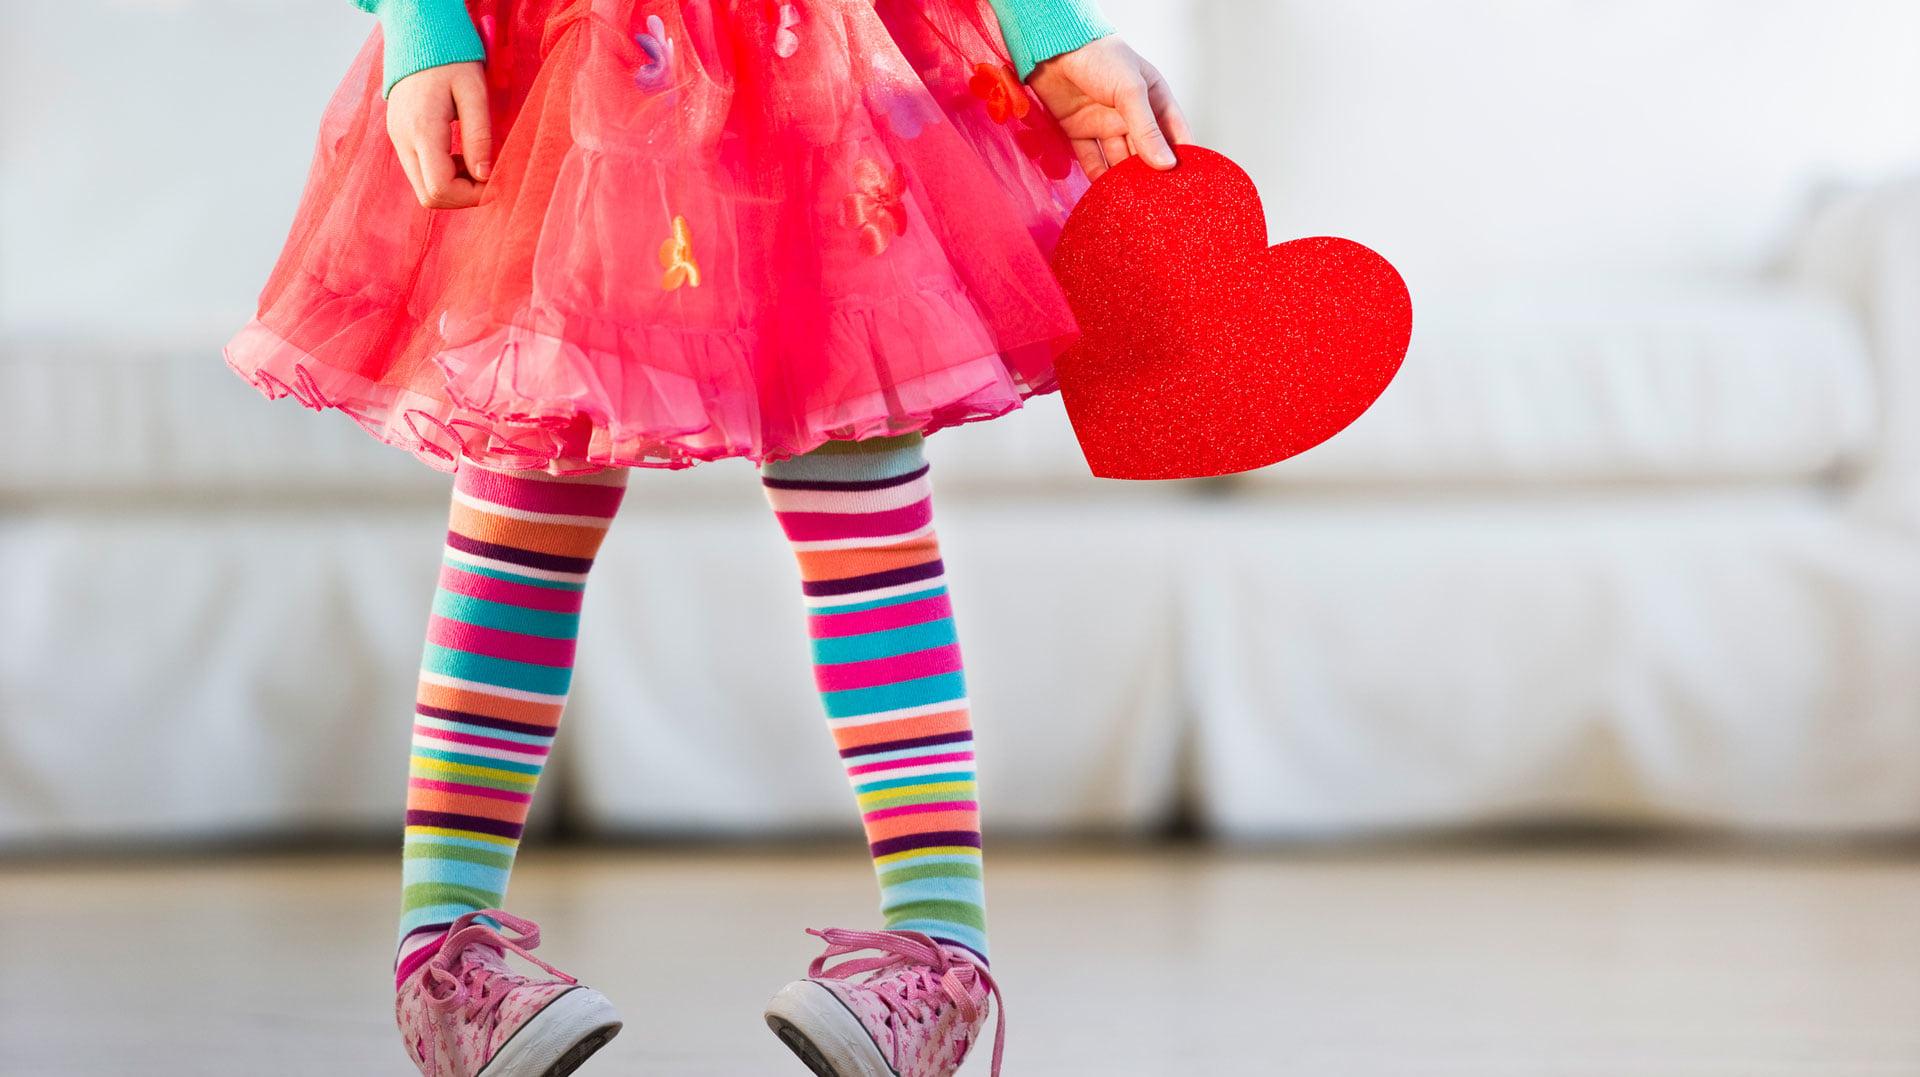 Kids Crafts for an Educational Valentine's Day